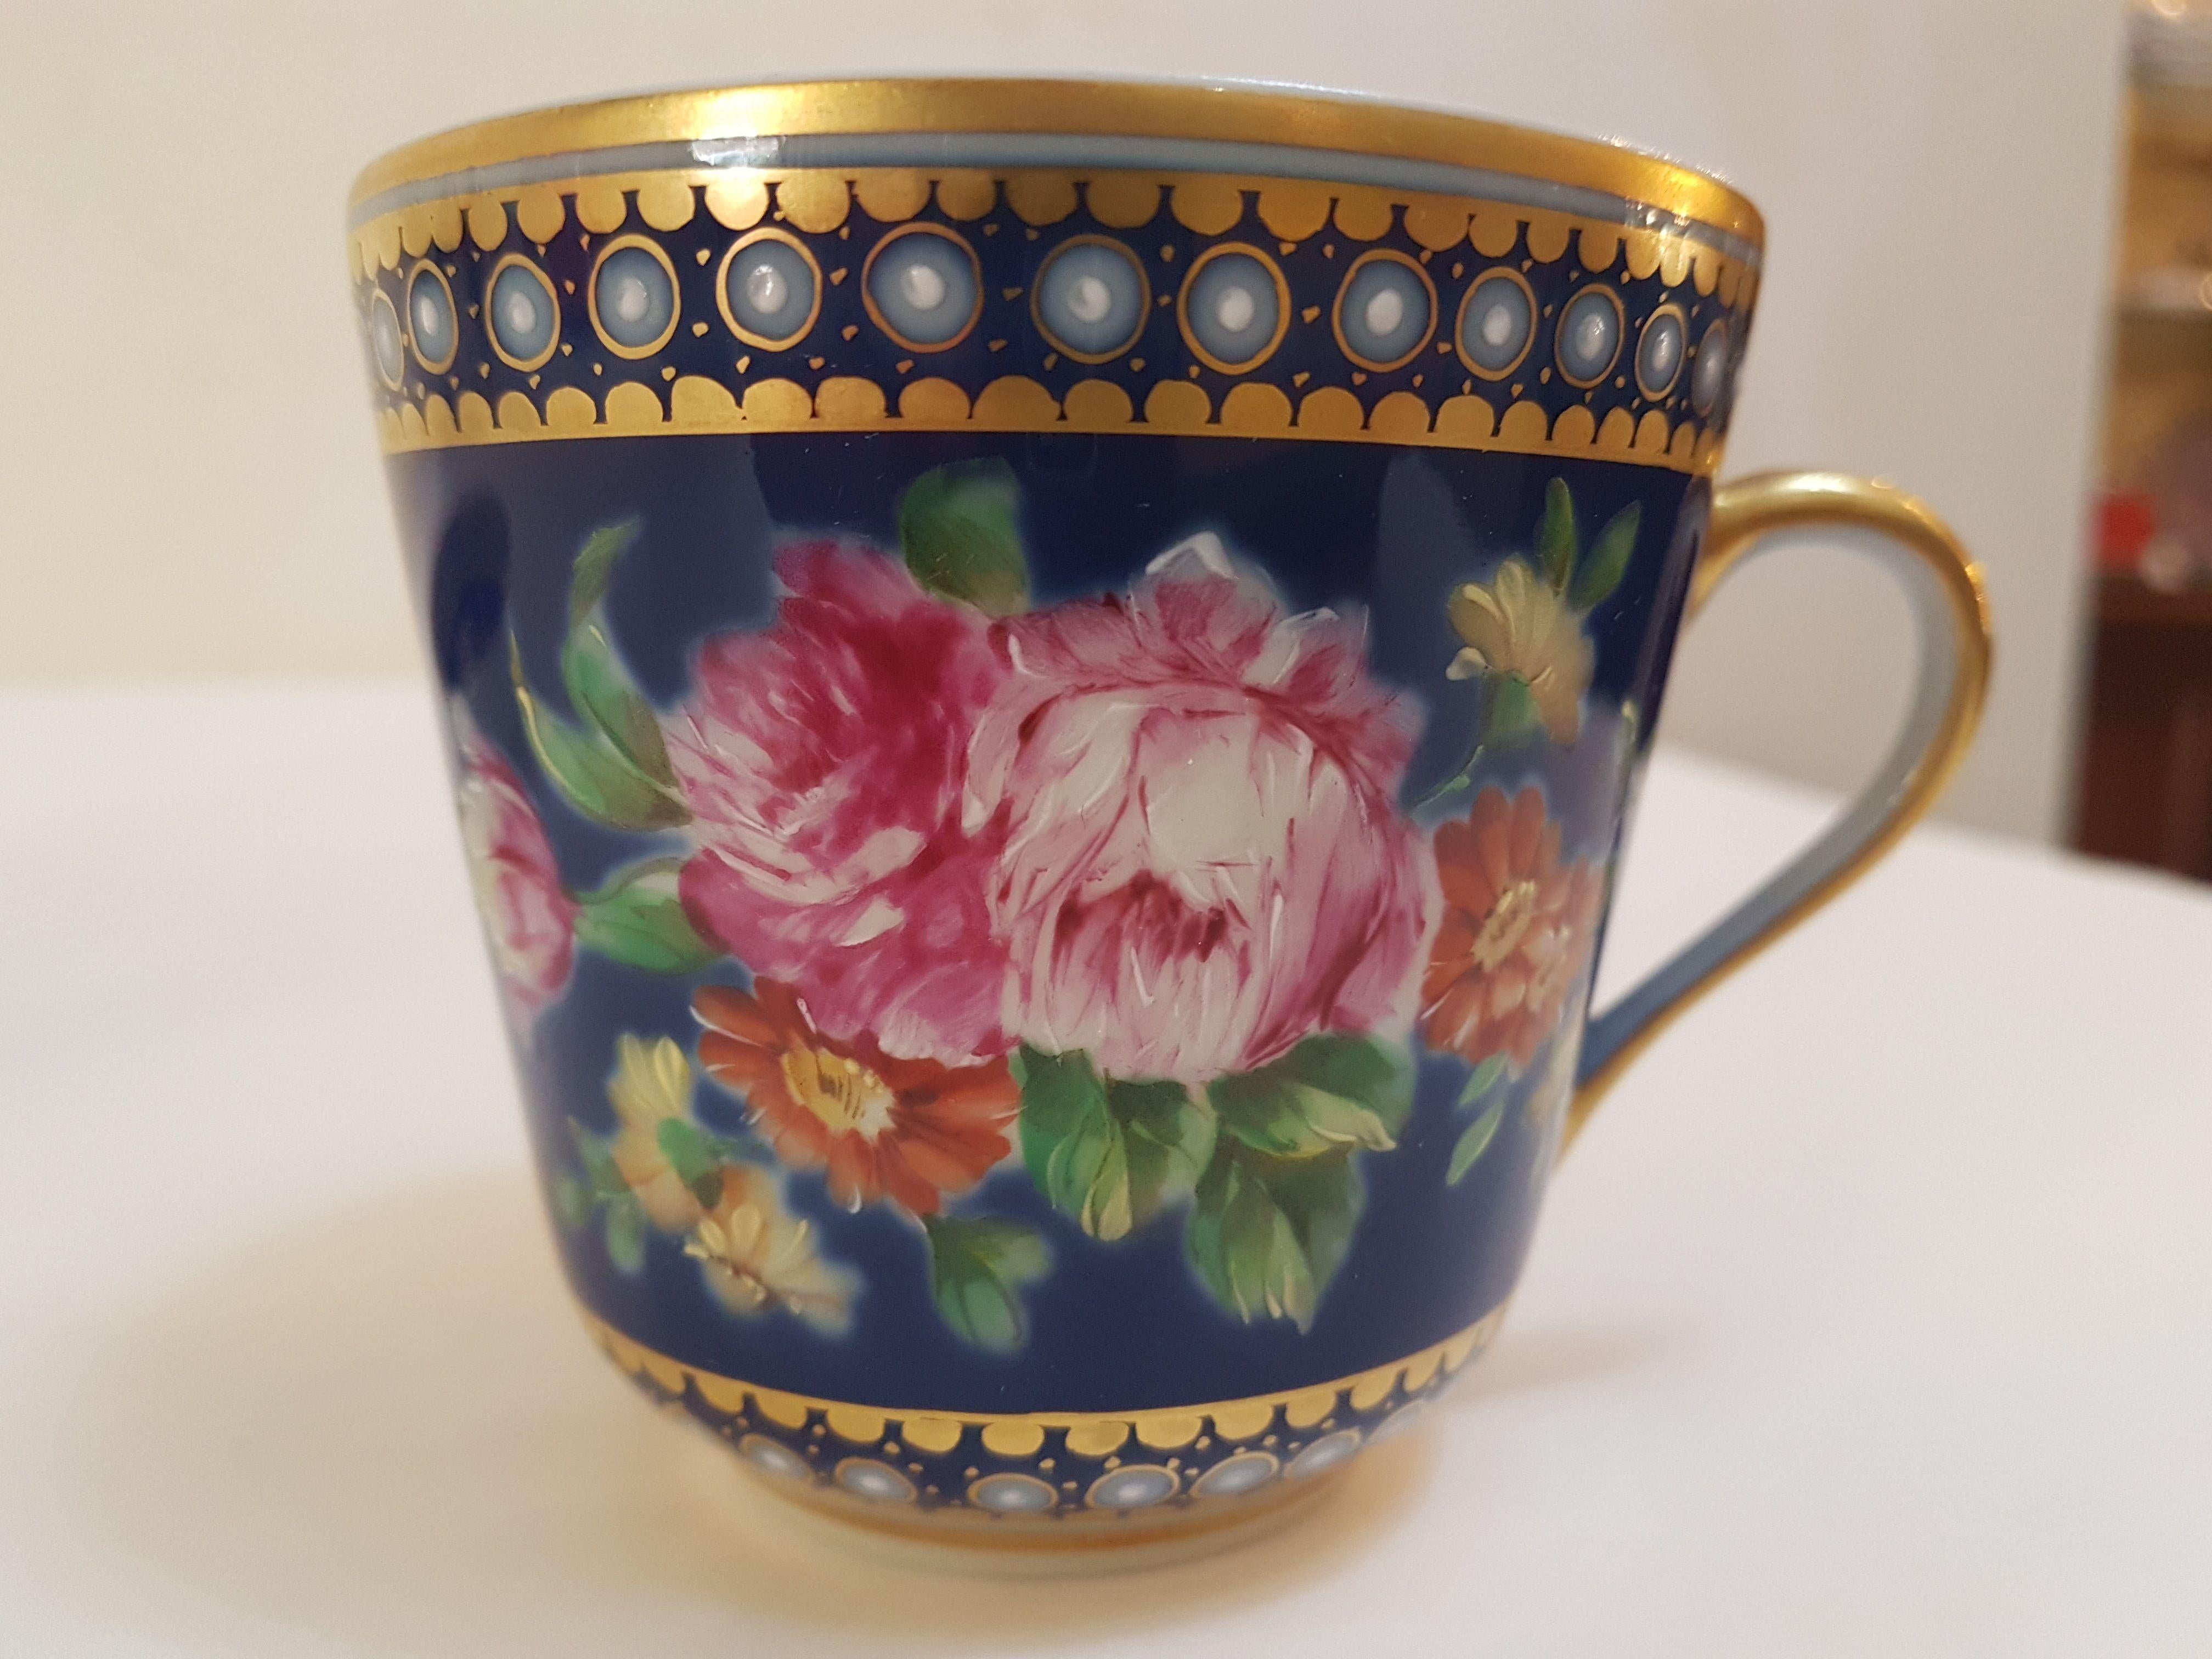 Portuguese 20th Century Hand Painted Vista Alegre Porcelain Collectible Tea Cup and Saucer